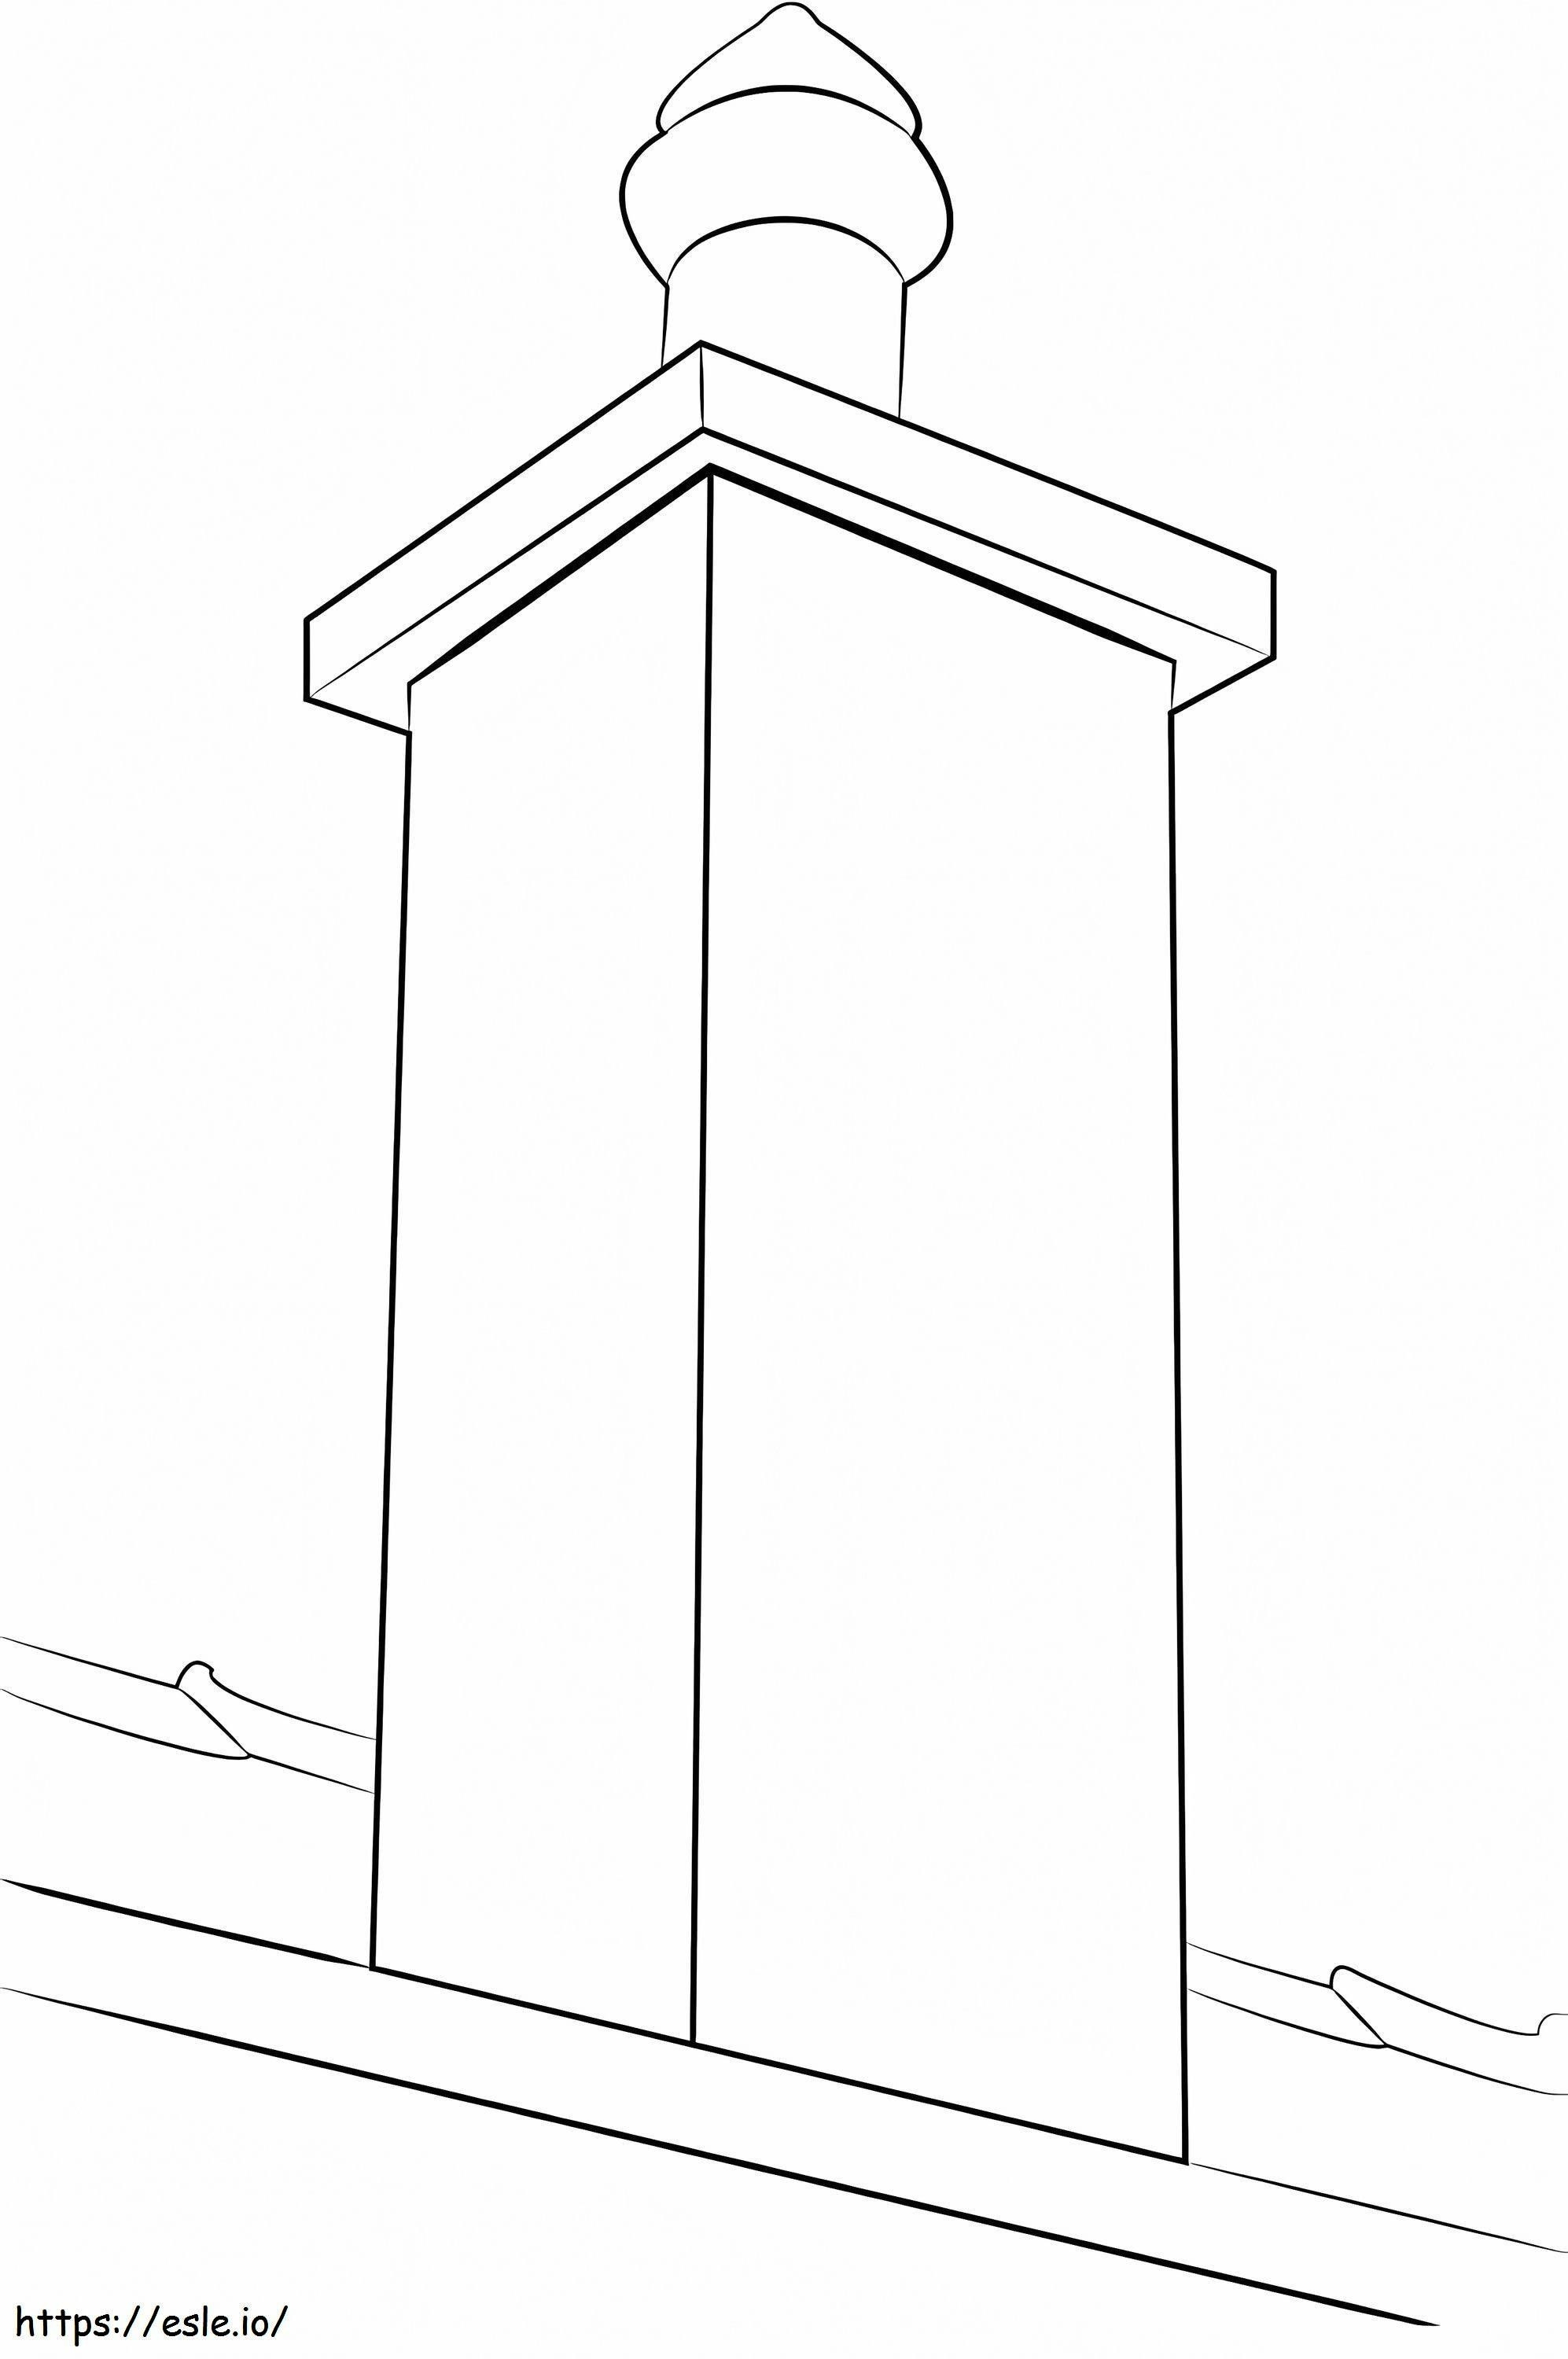 Singhal Chimney Cap coloring page